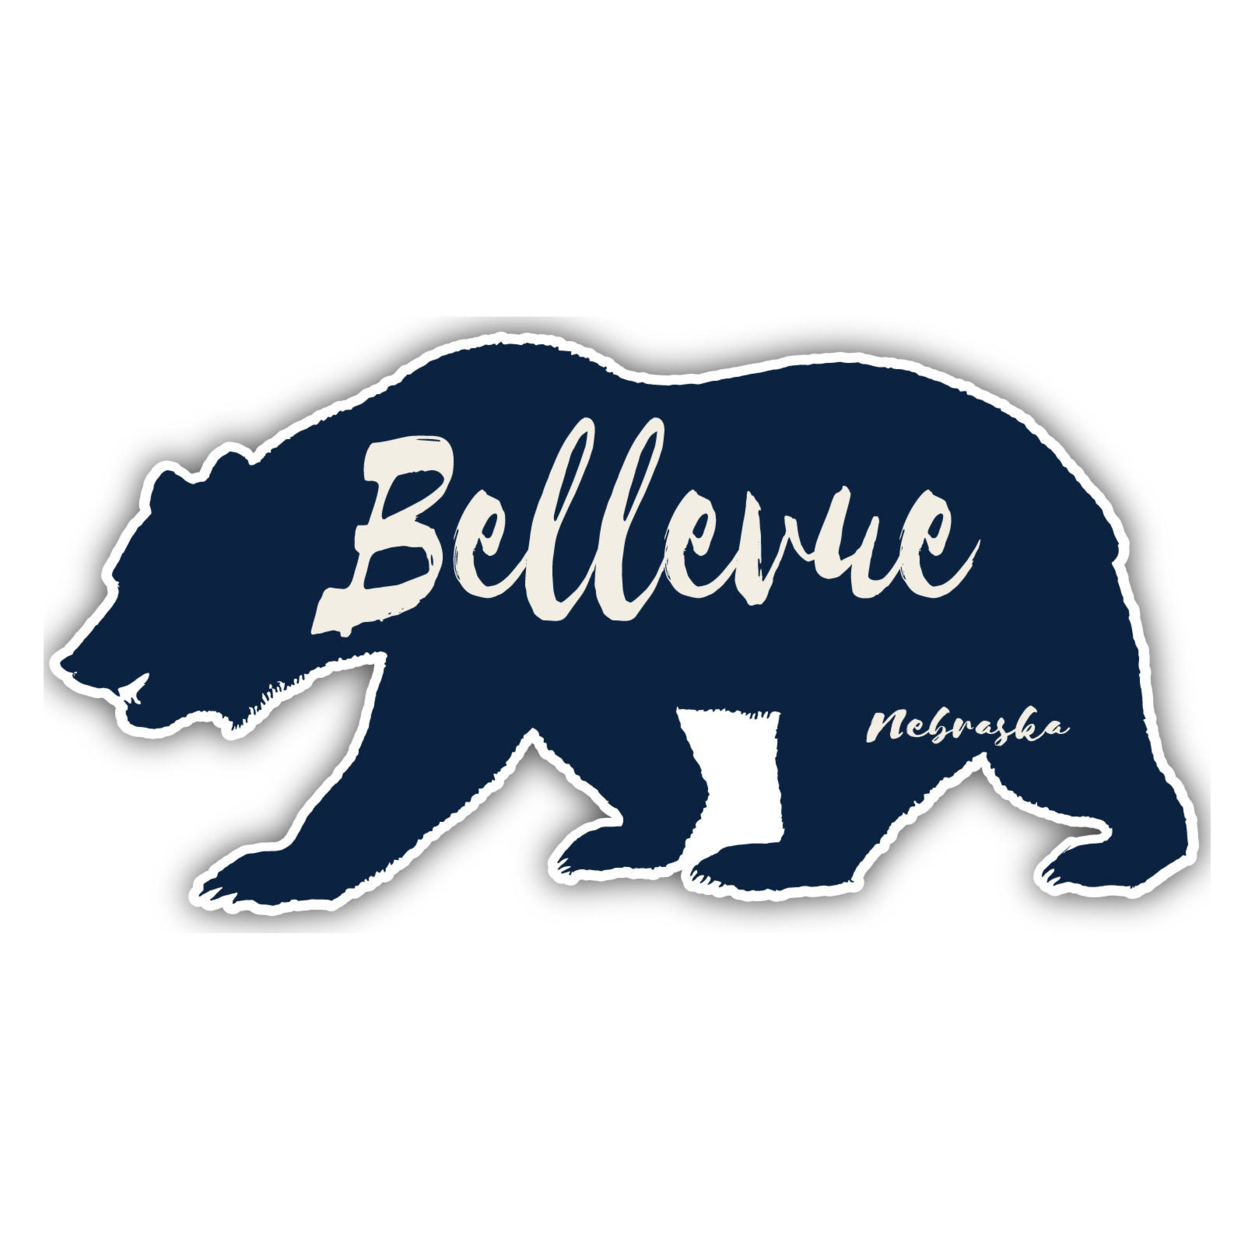 Bellevue Nebraska Souvenir Decorative Stickers (Choose Theme And Size) - 4-Pack, 12-Inch, Great Outdoors